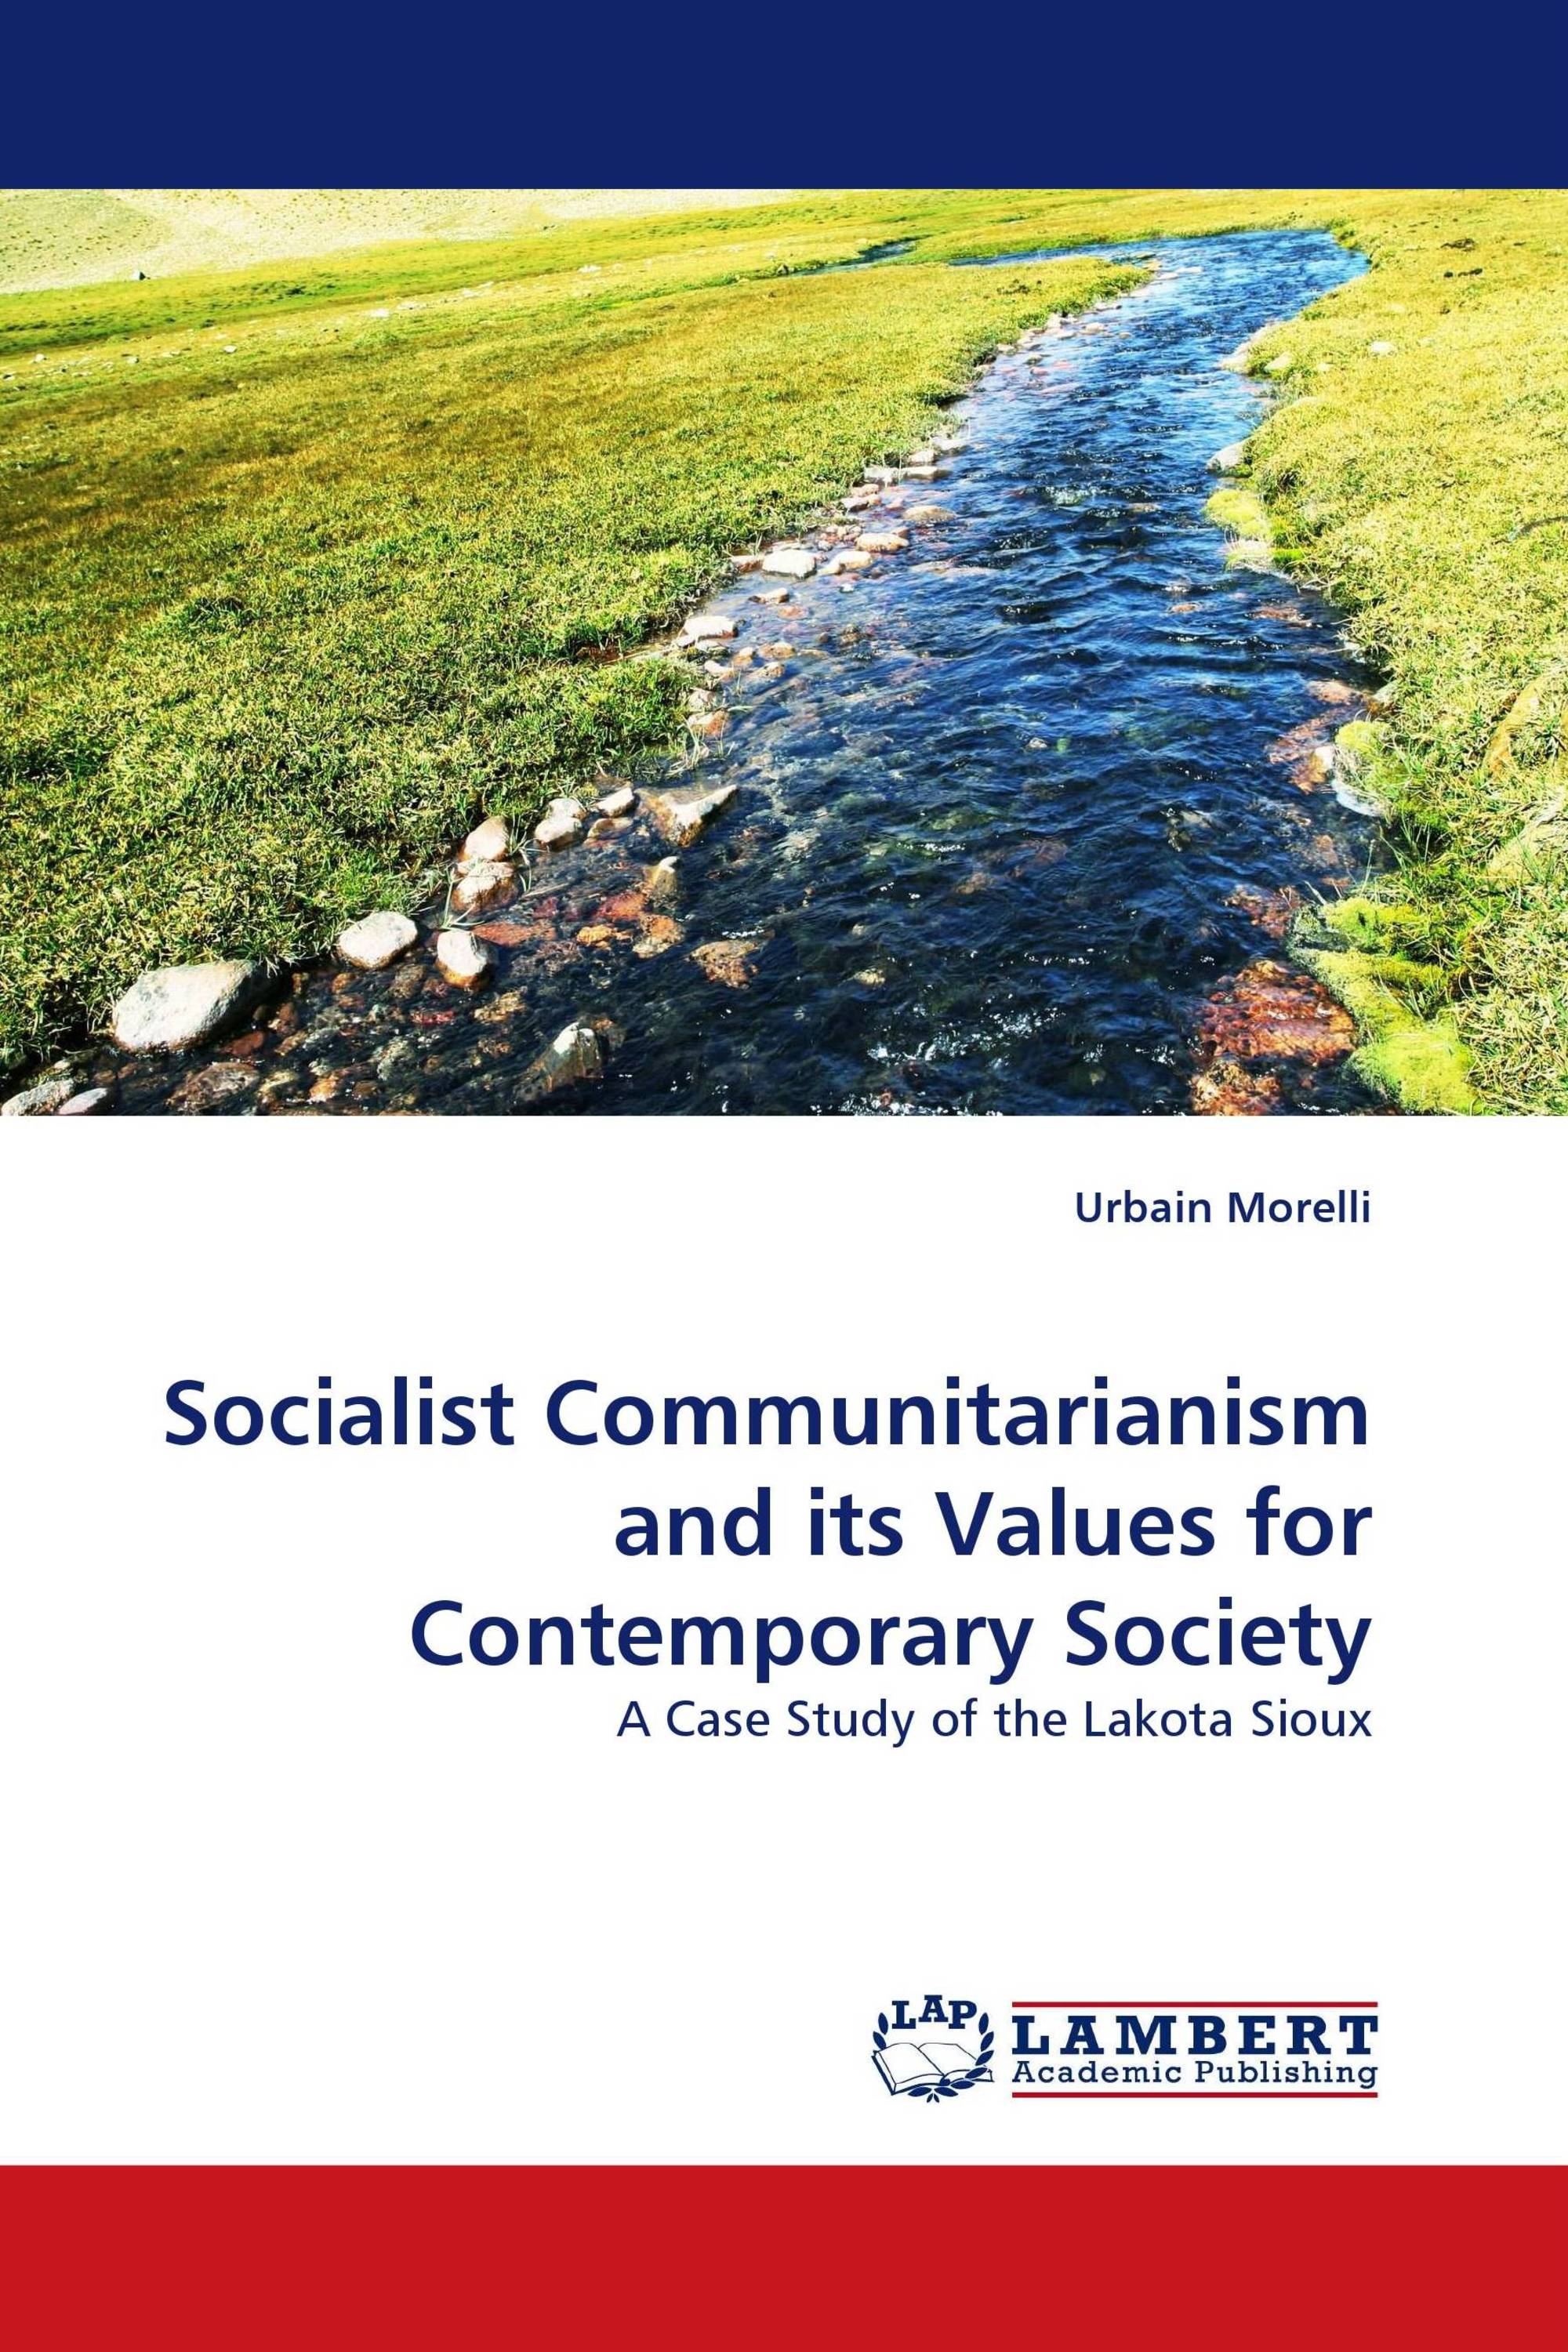 Socialist Communitarianism and its Values for Contemporary Society